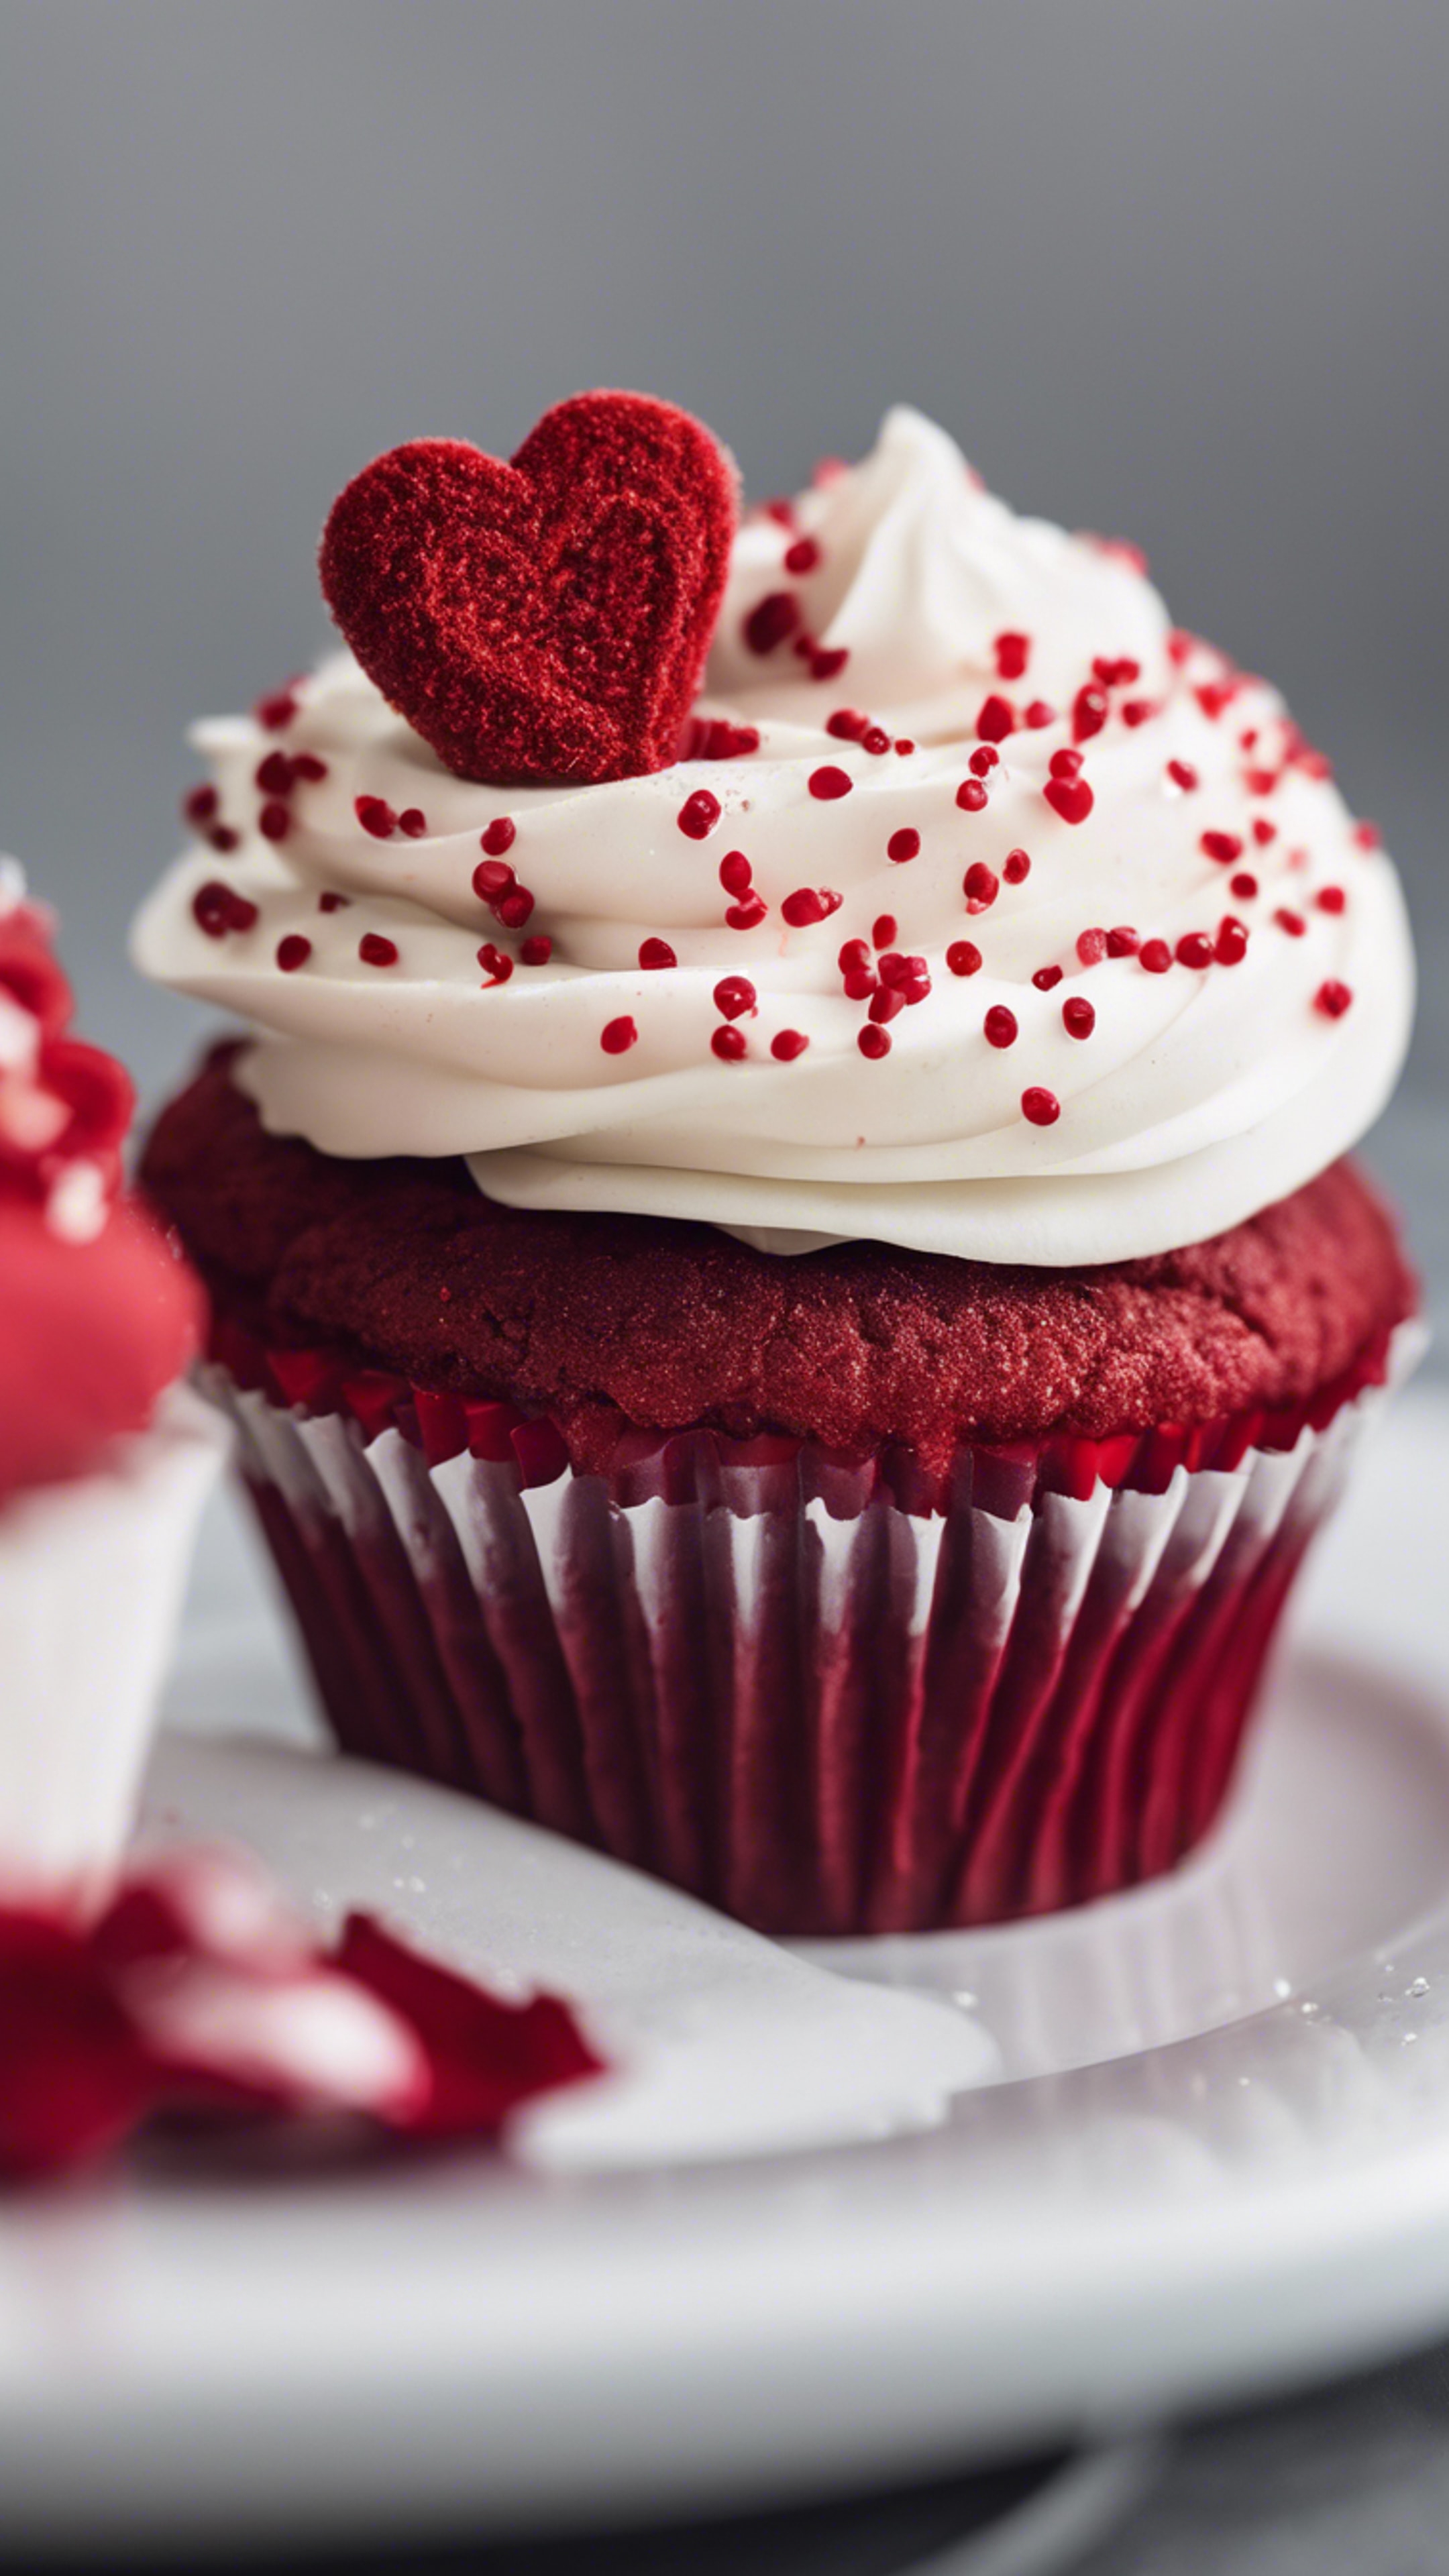 A red velvet cupcake with a heart-shaped sprinkle on top, presented on a white ceramic plate.壁紙[2d98083c137b4c3e8f81]